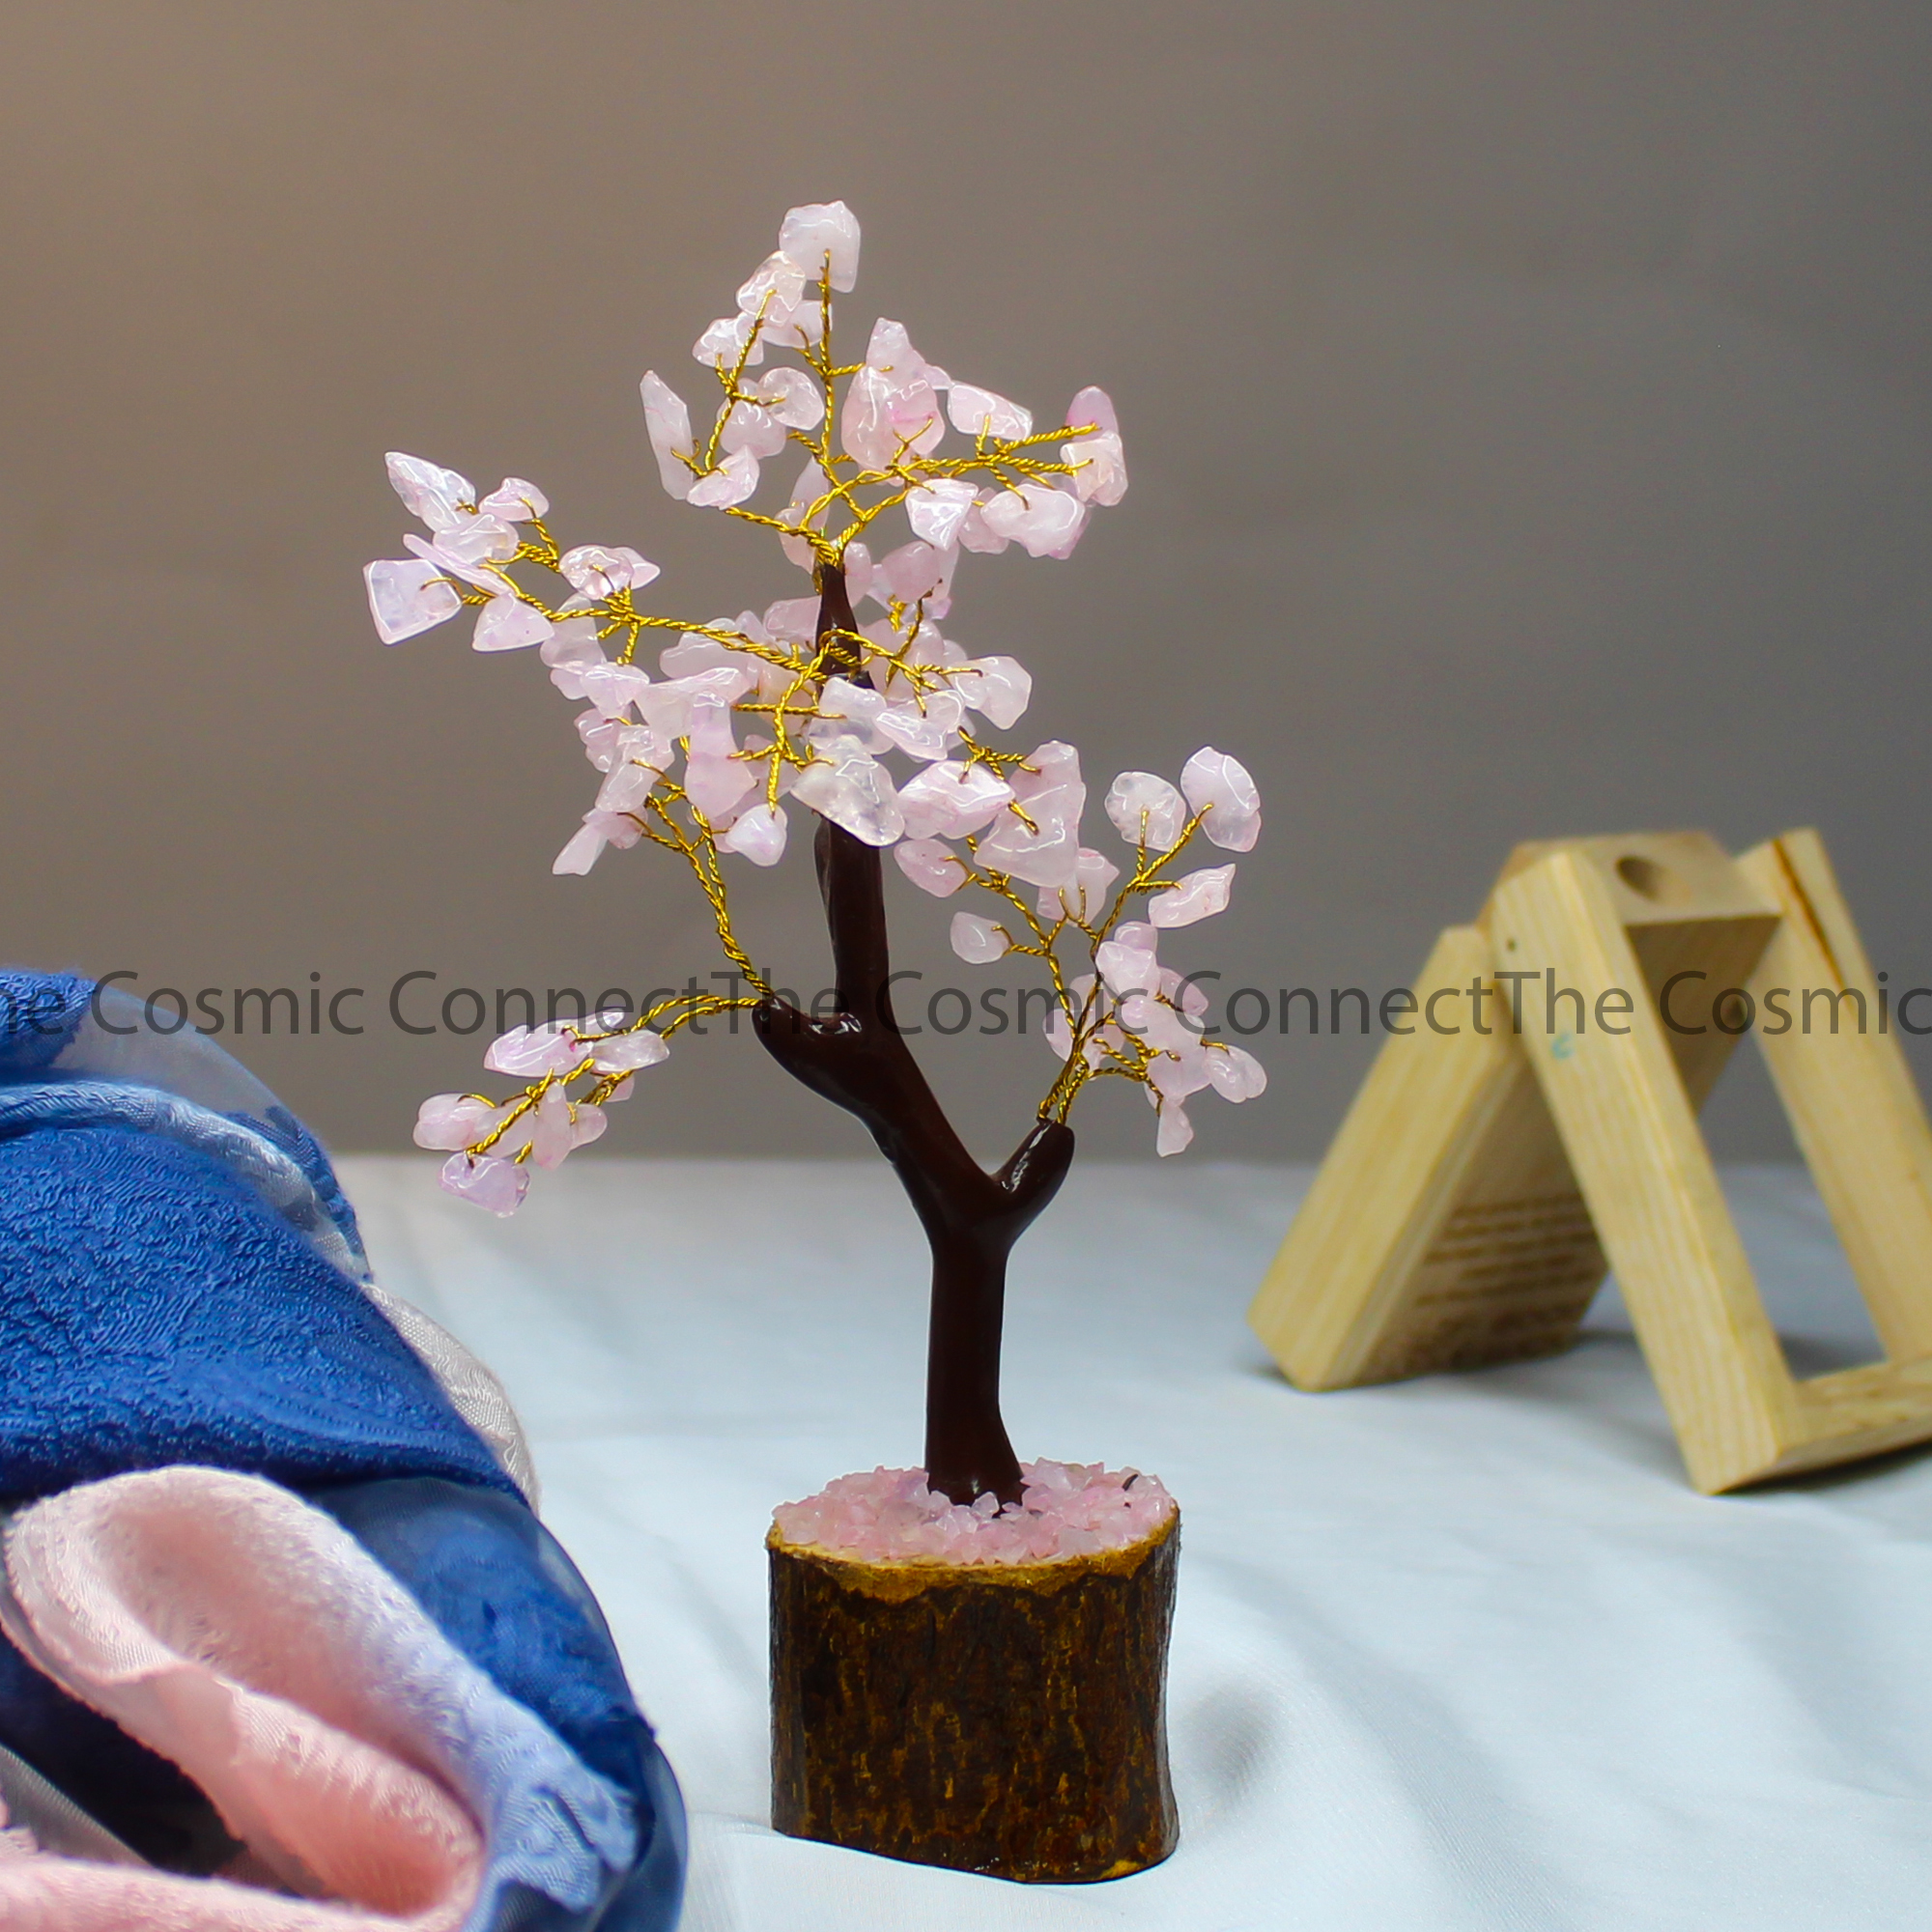 Rose Quartz Tree for Emotional Balance and Supports a Harmonious Environment